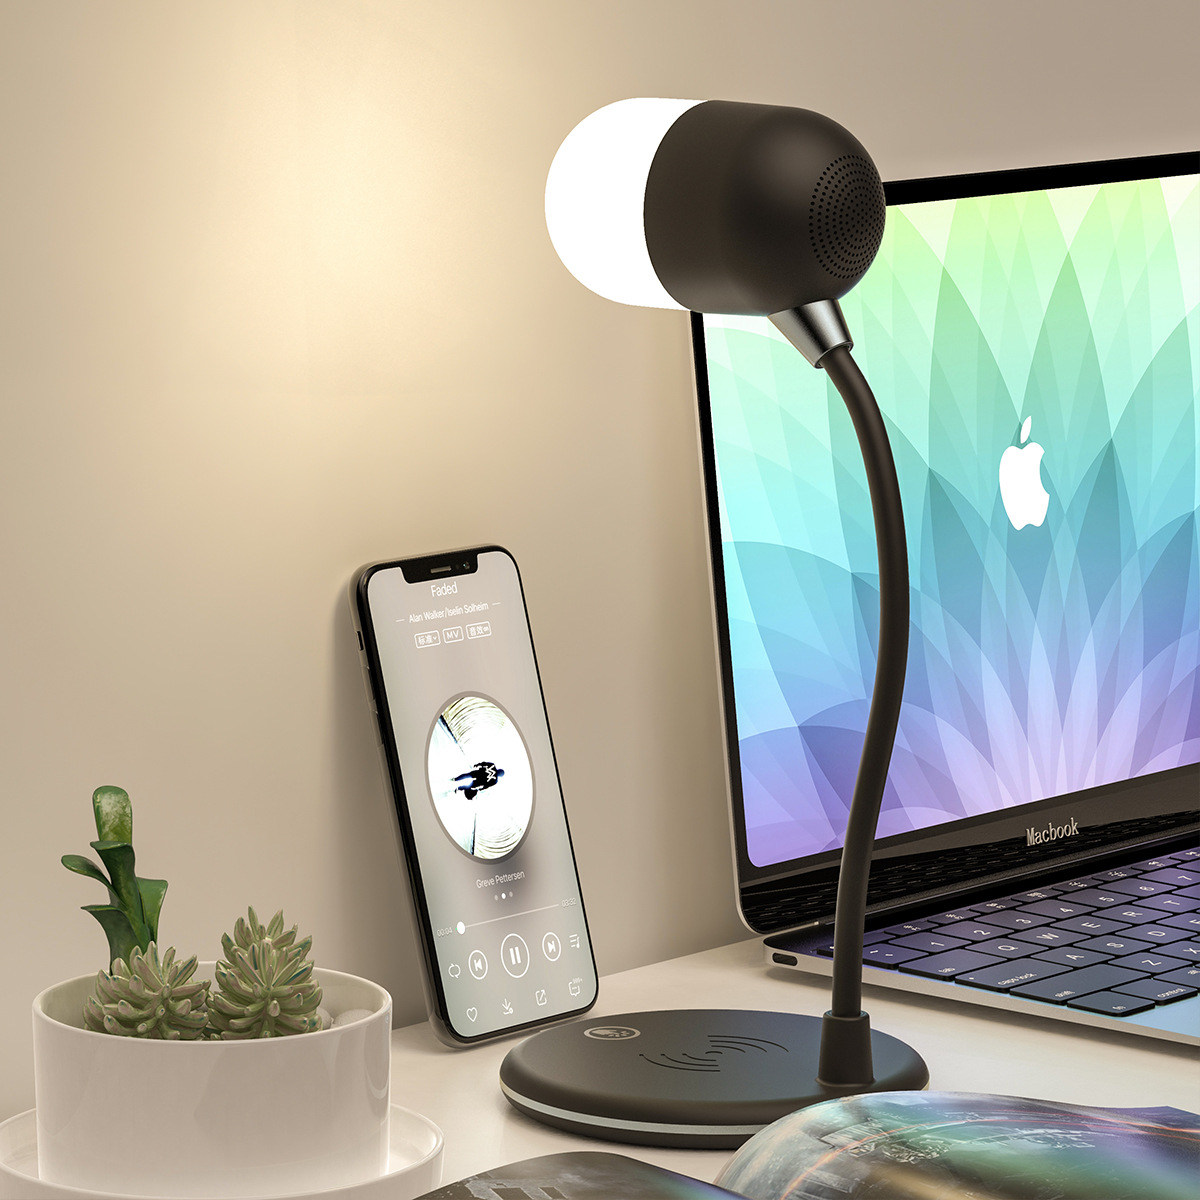 New 15W Wireless Charger Charger Bluetooth Bluetooth Speaker Desk Lamp Audio Reading Lamp